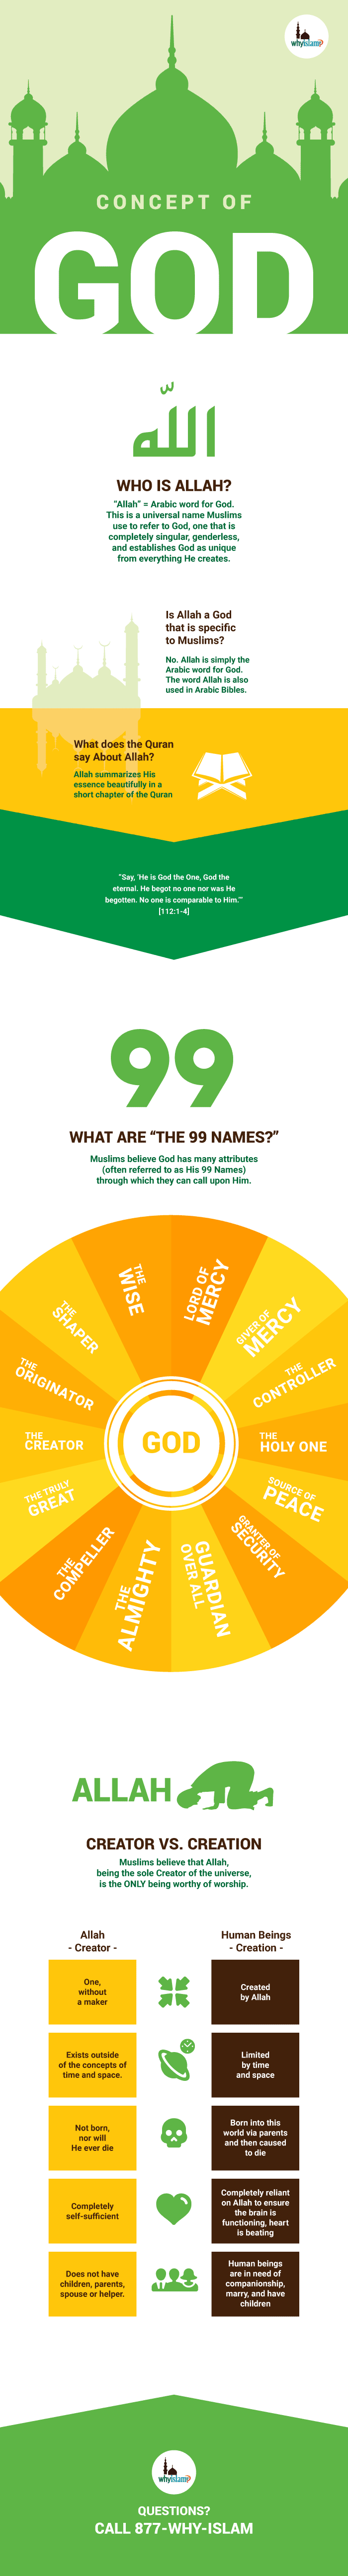 Concept of God in Islam Infographic